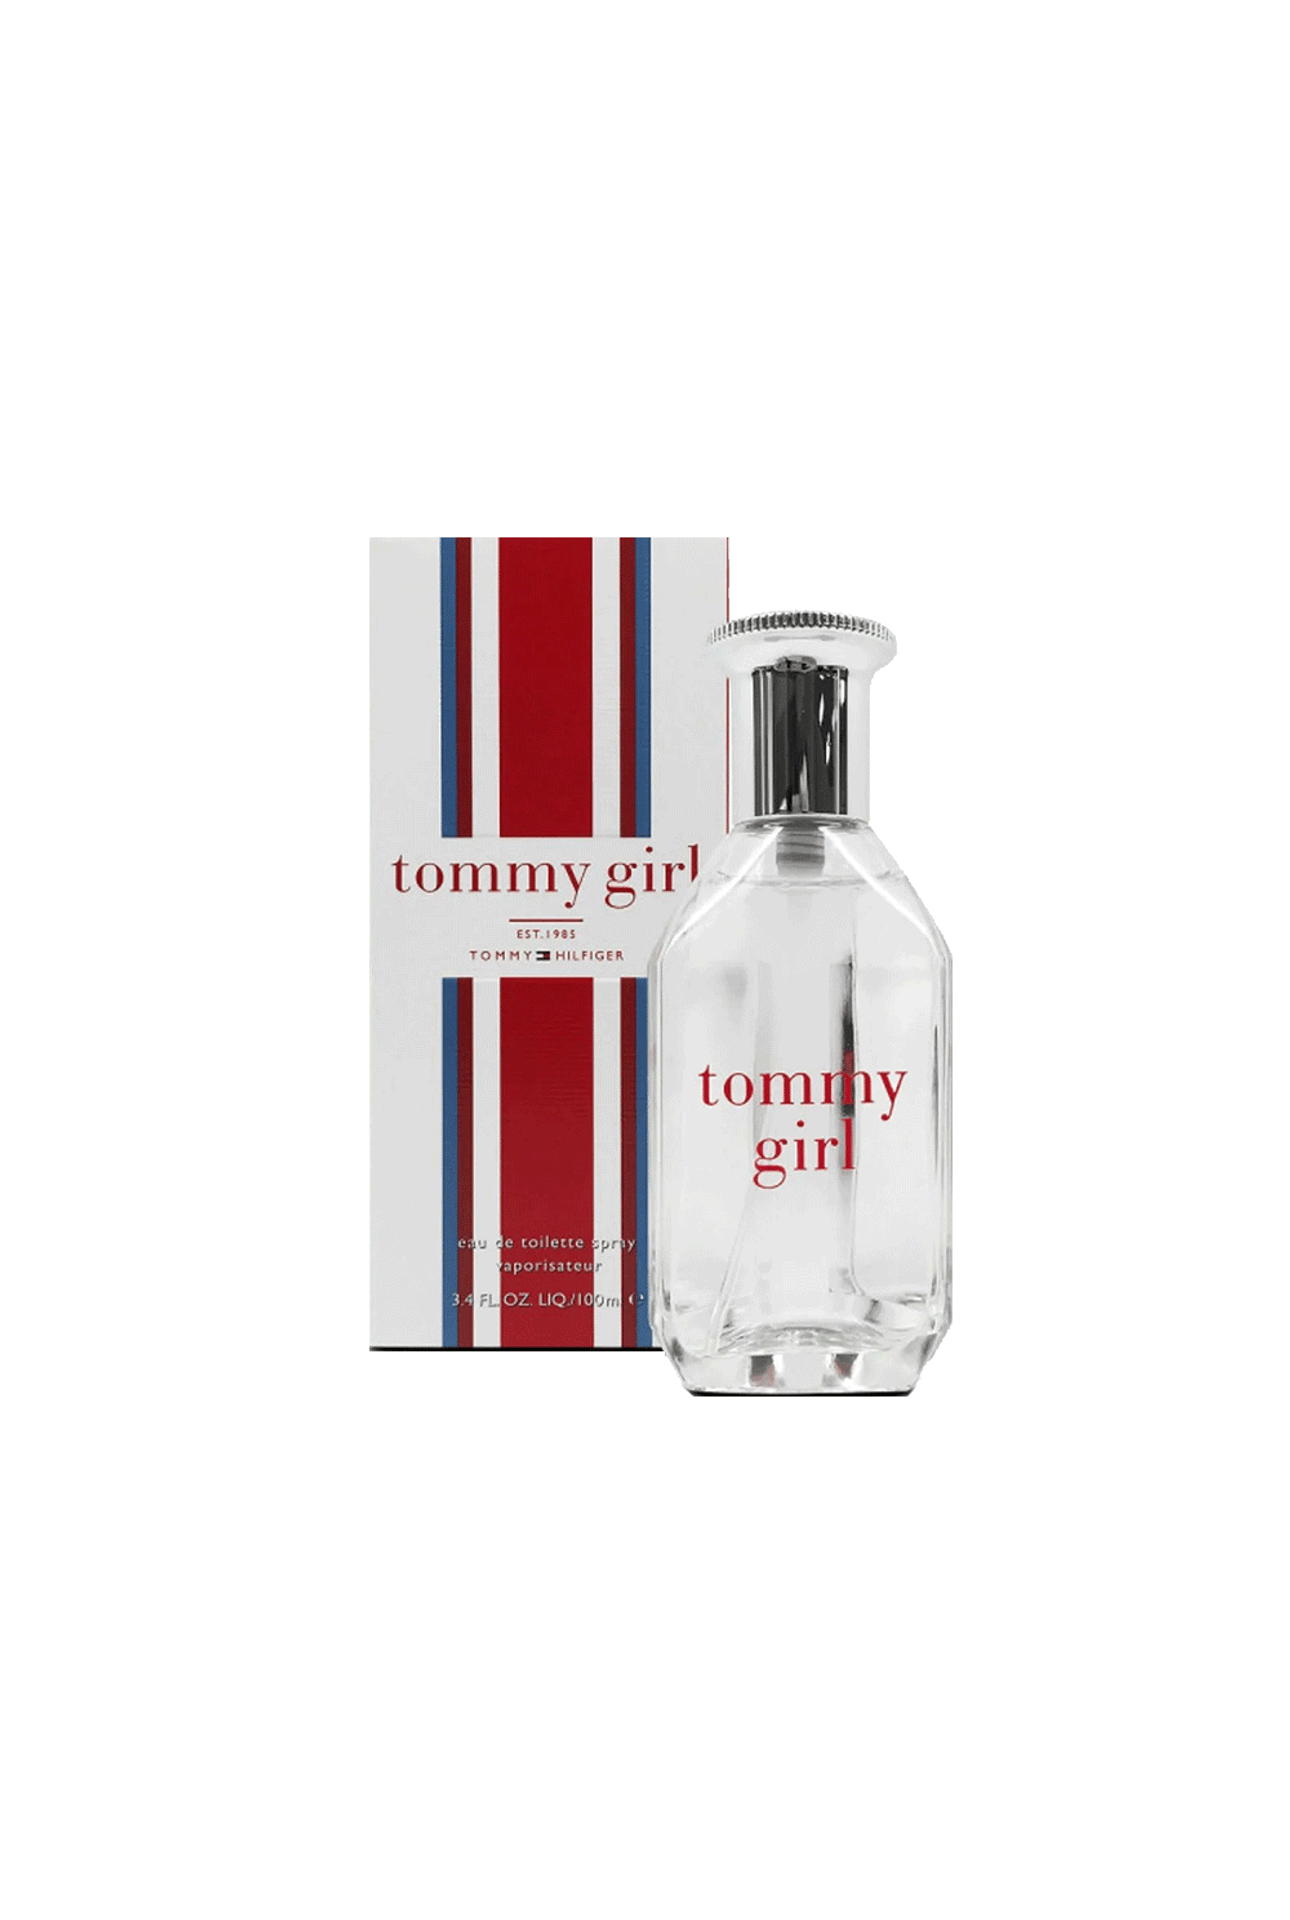 Tommy-Girl-Edt-x-100Ml-0022548040126_img1